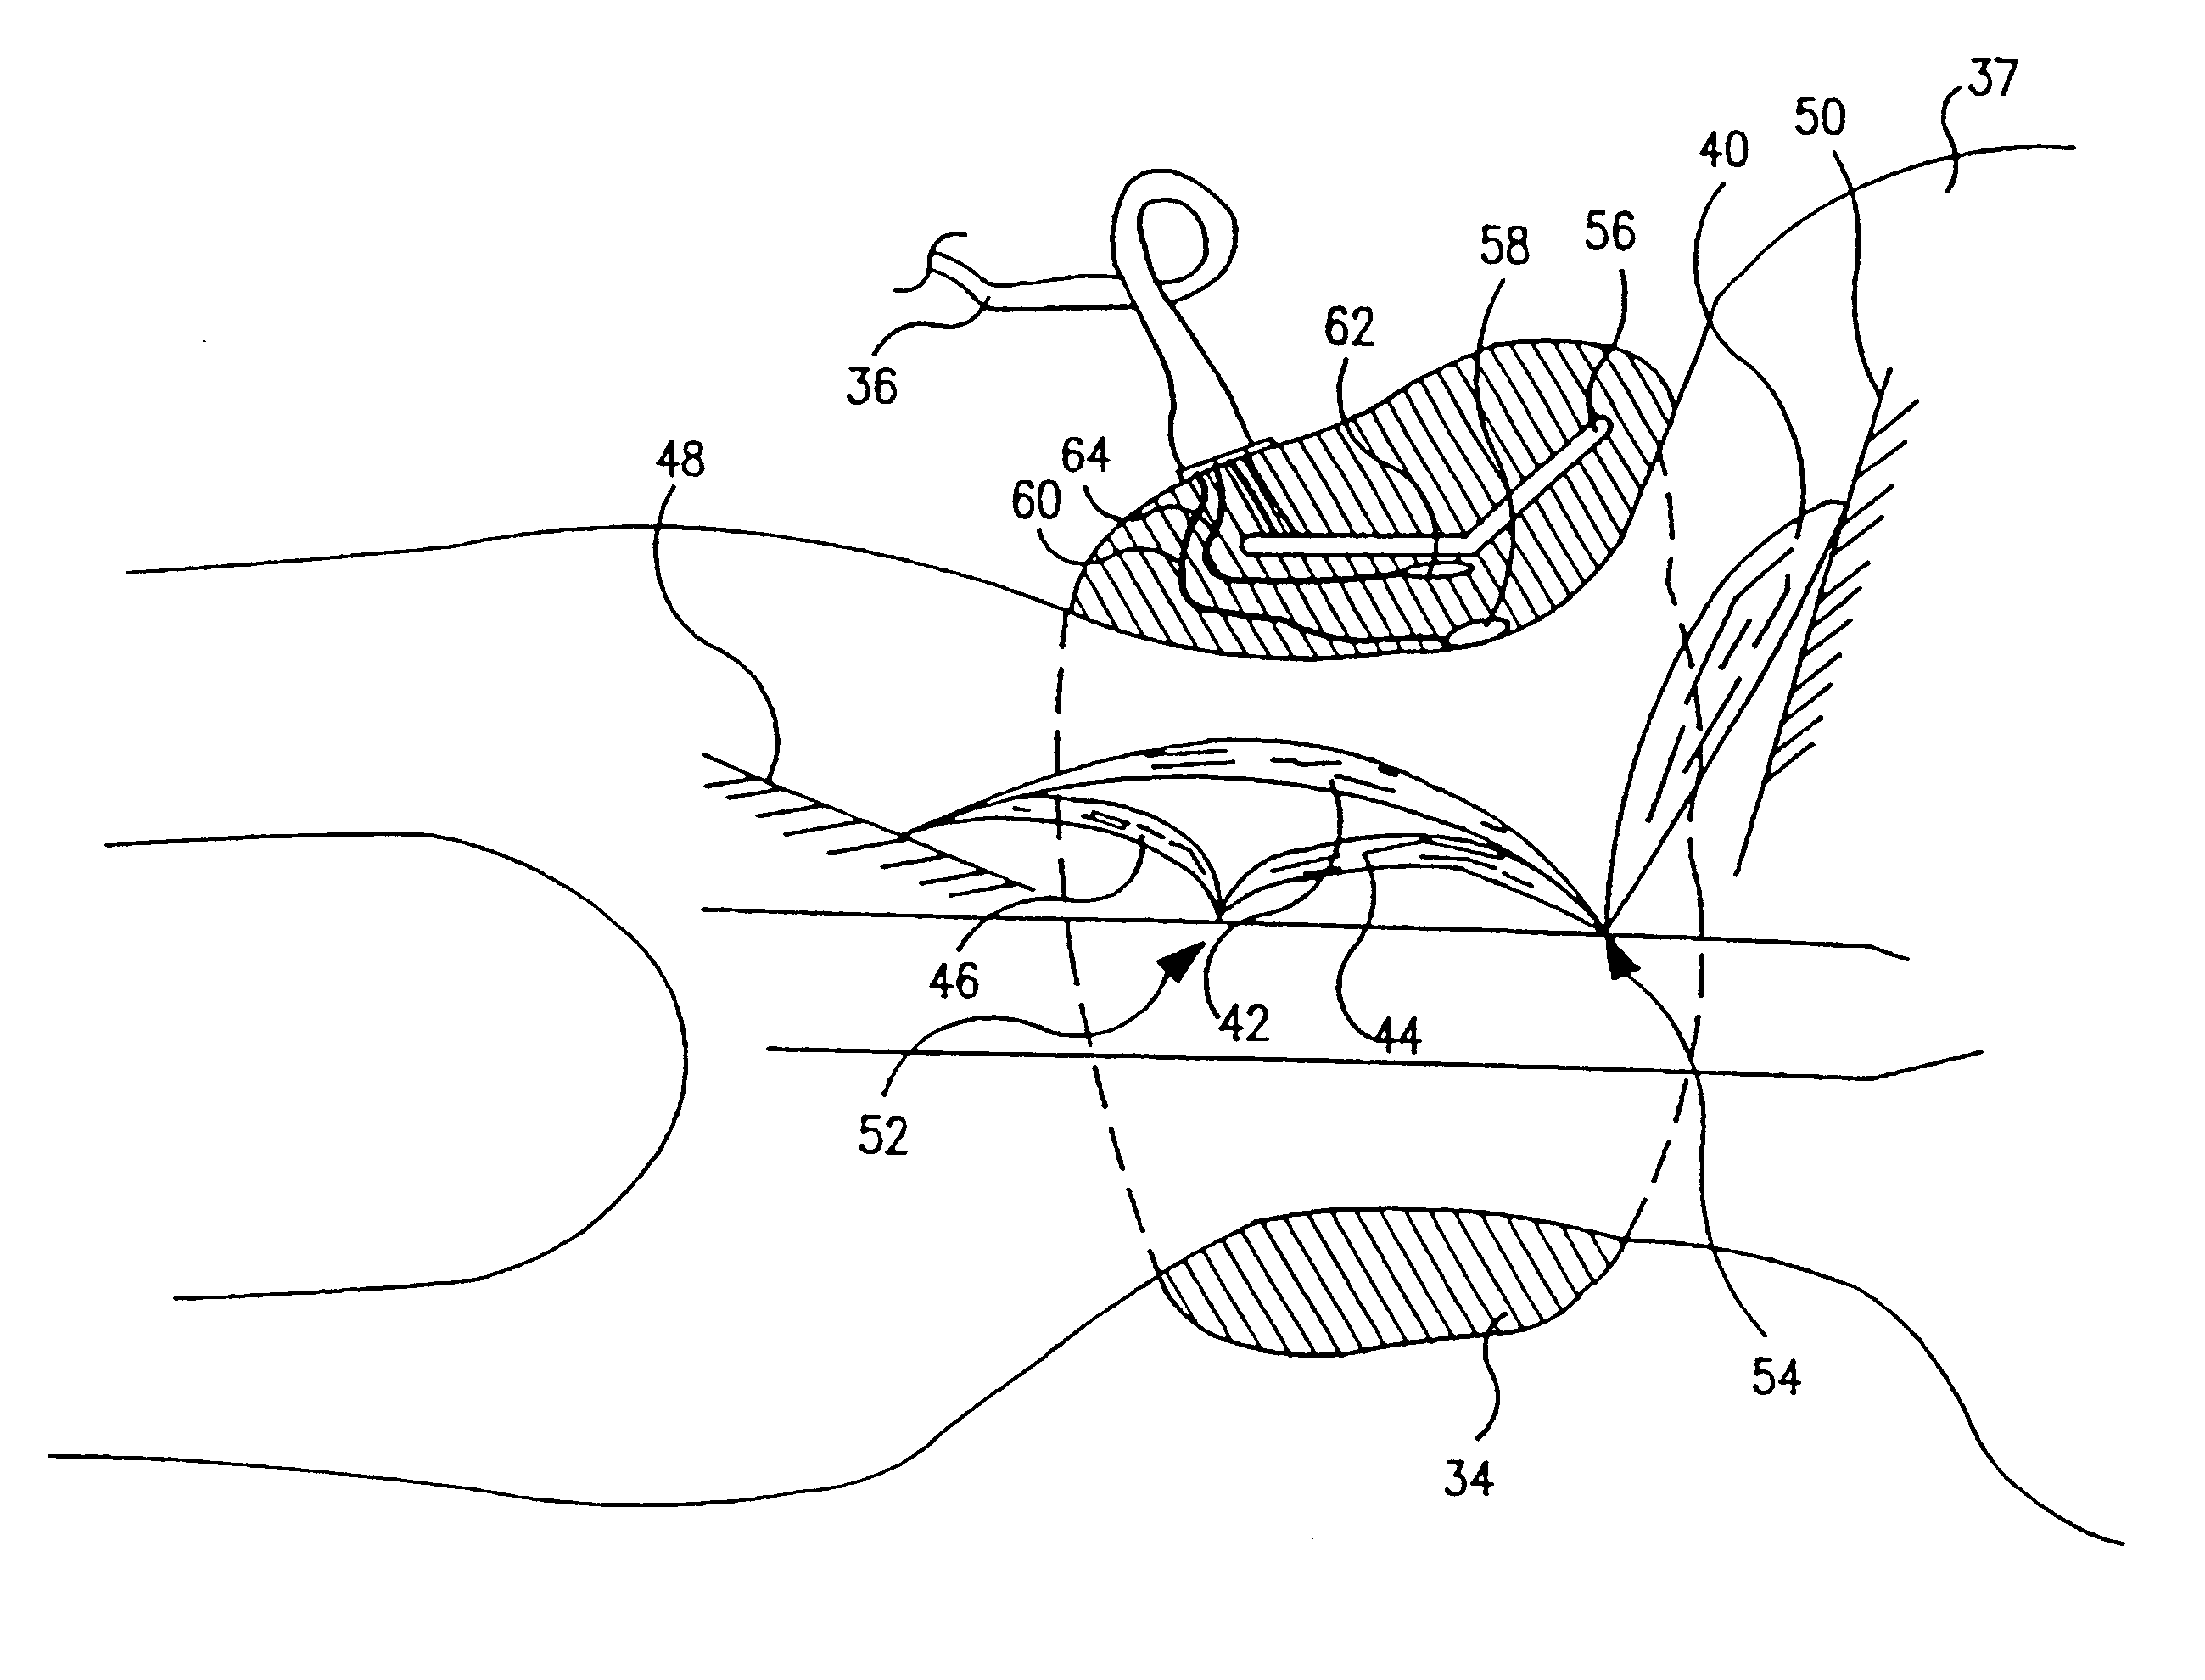 Muscle stimulating device and method for diagnosing and treating a breathing disorder